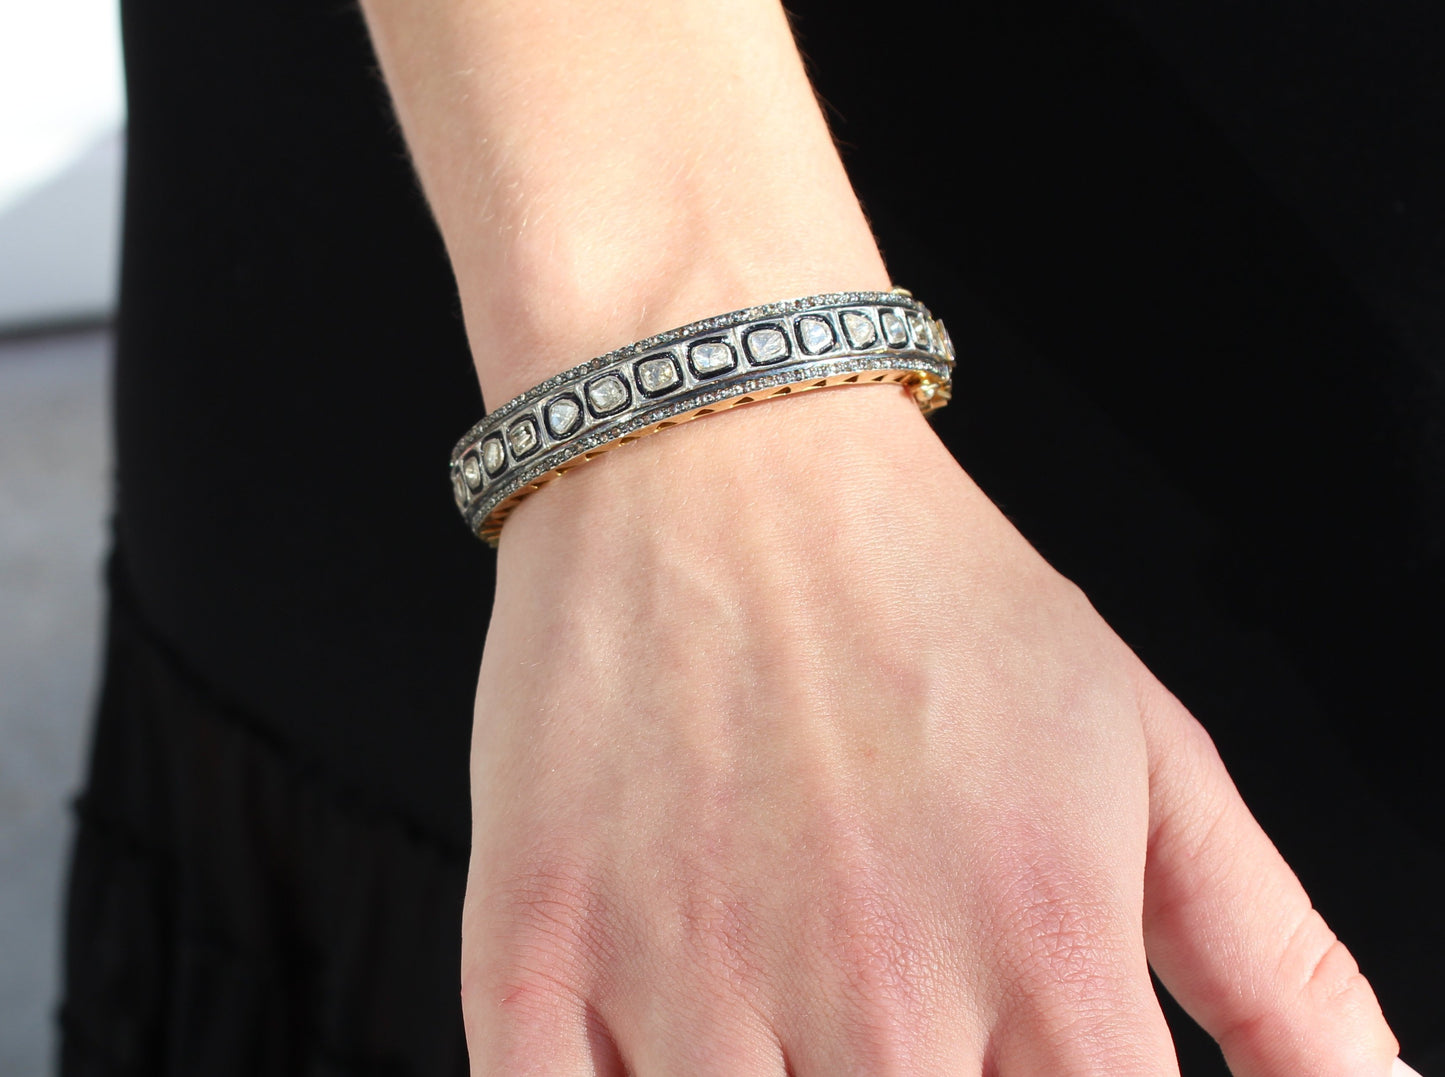 Rose cut diamond bangle with rhodium, oxidized sterling silver and yellow gold.   Sourced from India